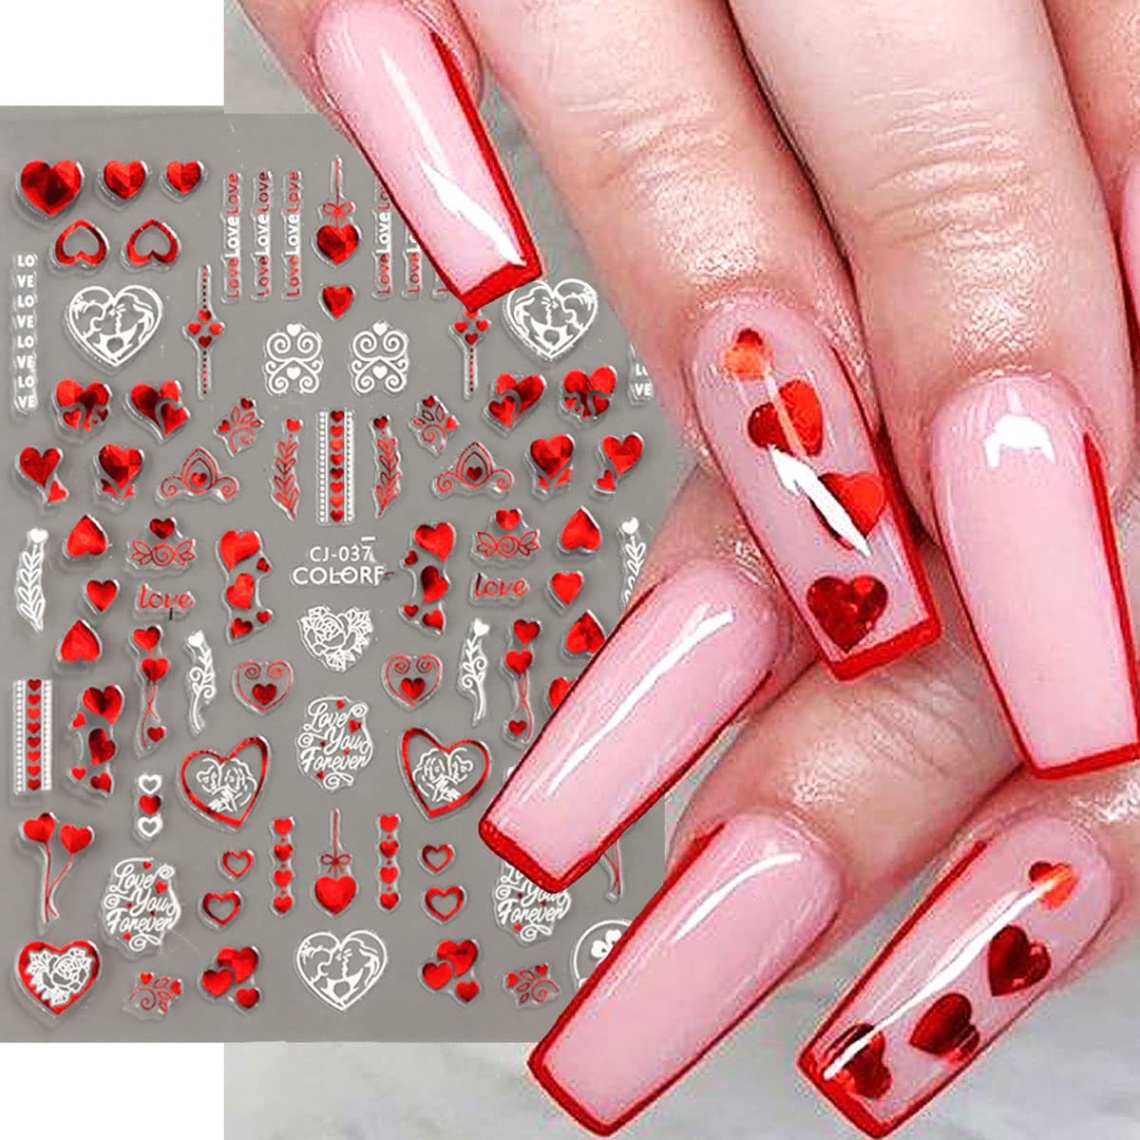 nail designs for valentines day Niche Utama Home Valentines Day Nail Art Stickers Decal Red Heart Nail Sticker Valentines  Nail Decorations D Self-Adhesive Red White Rose Love Heart Lip Nail Design